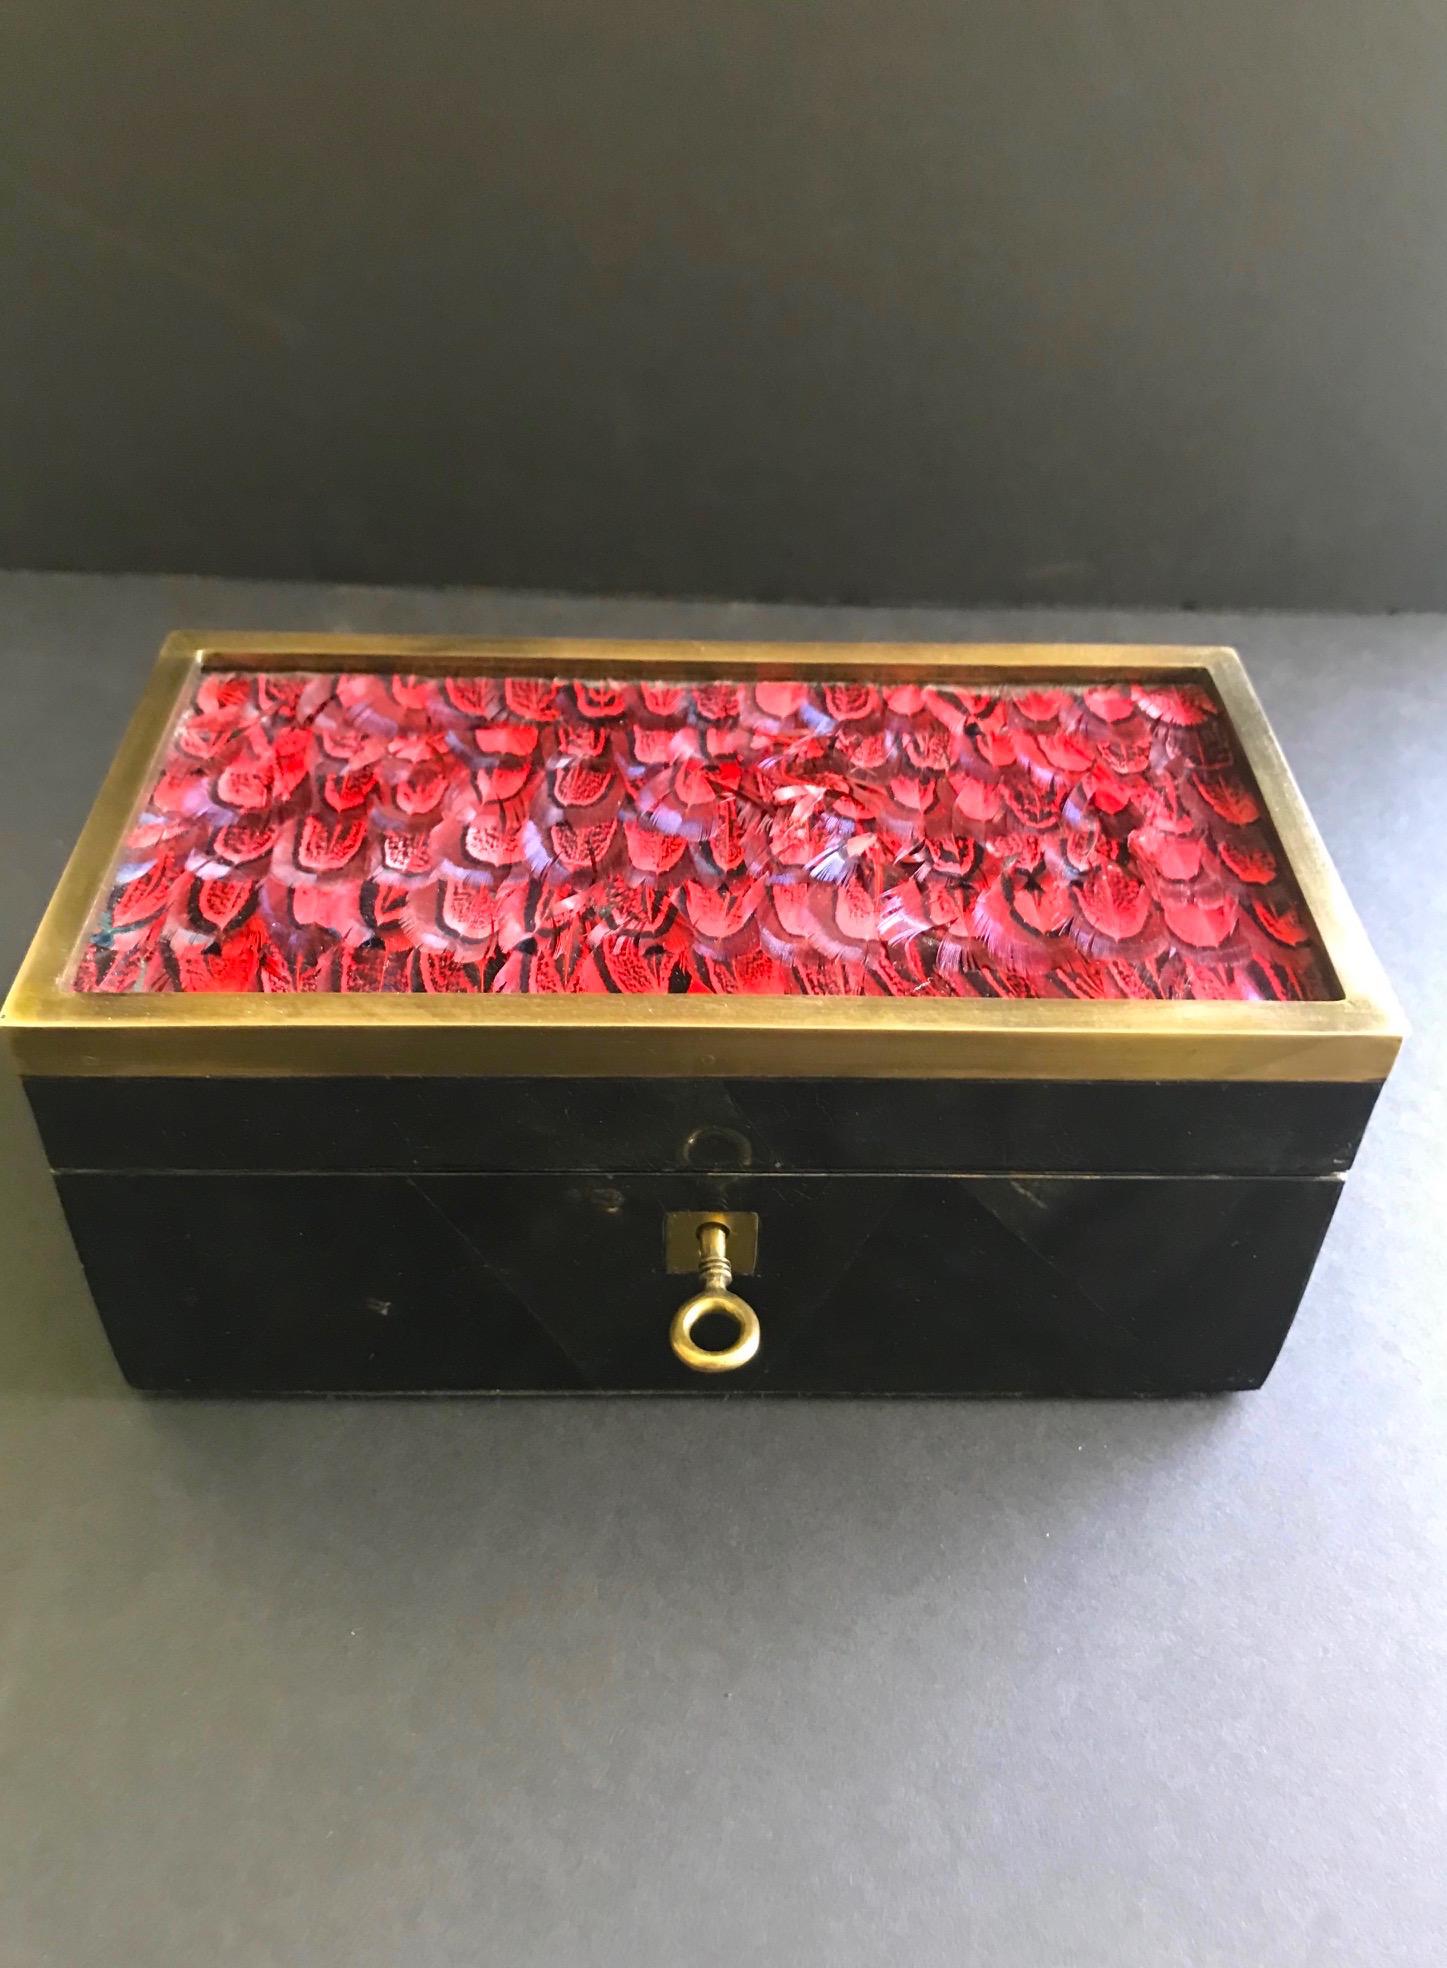 Exquisitely handcrafted decorative box or jewelry box. Comprised of lacquered pen shell with geometric mosaic patterns in hues of black. Box has bronze trim accent and exotic bird feathers in vibrant red. Fitted with bronze mount and key, and